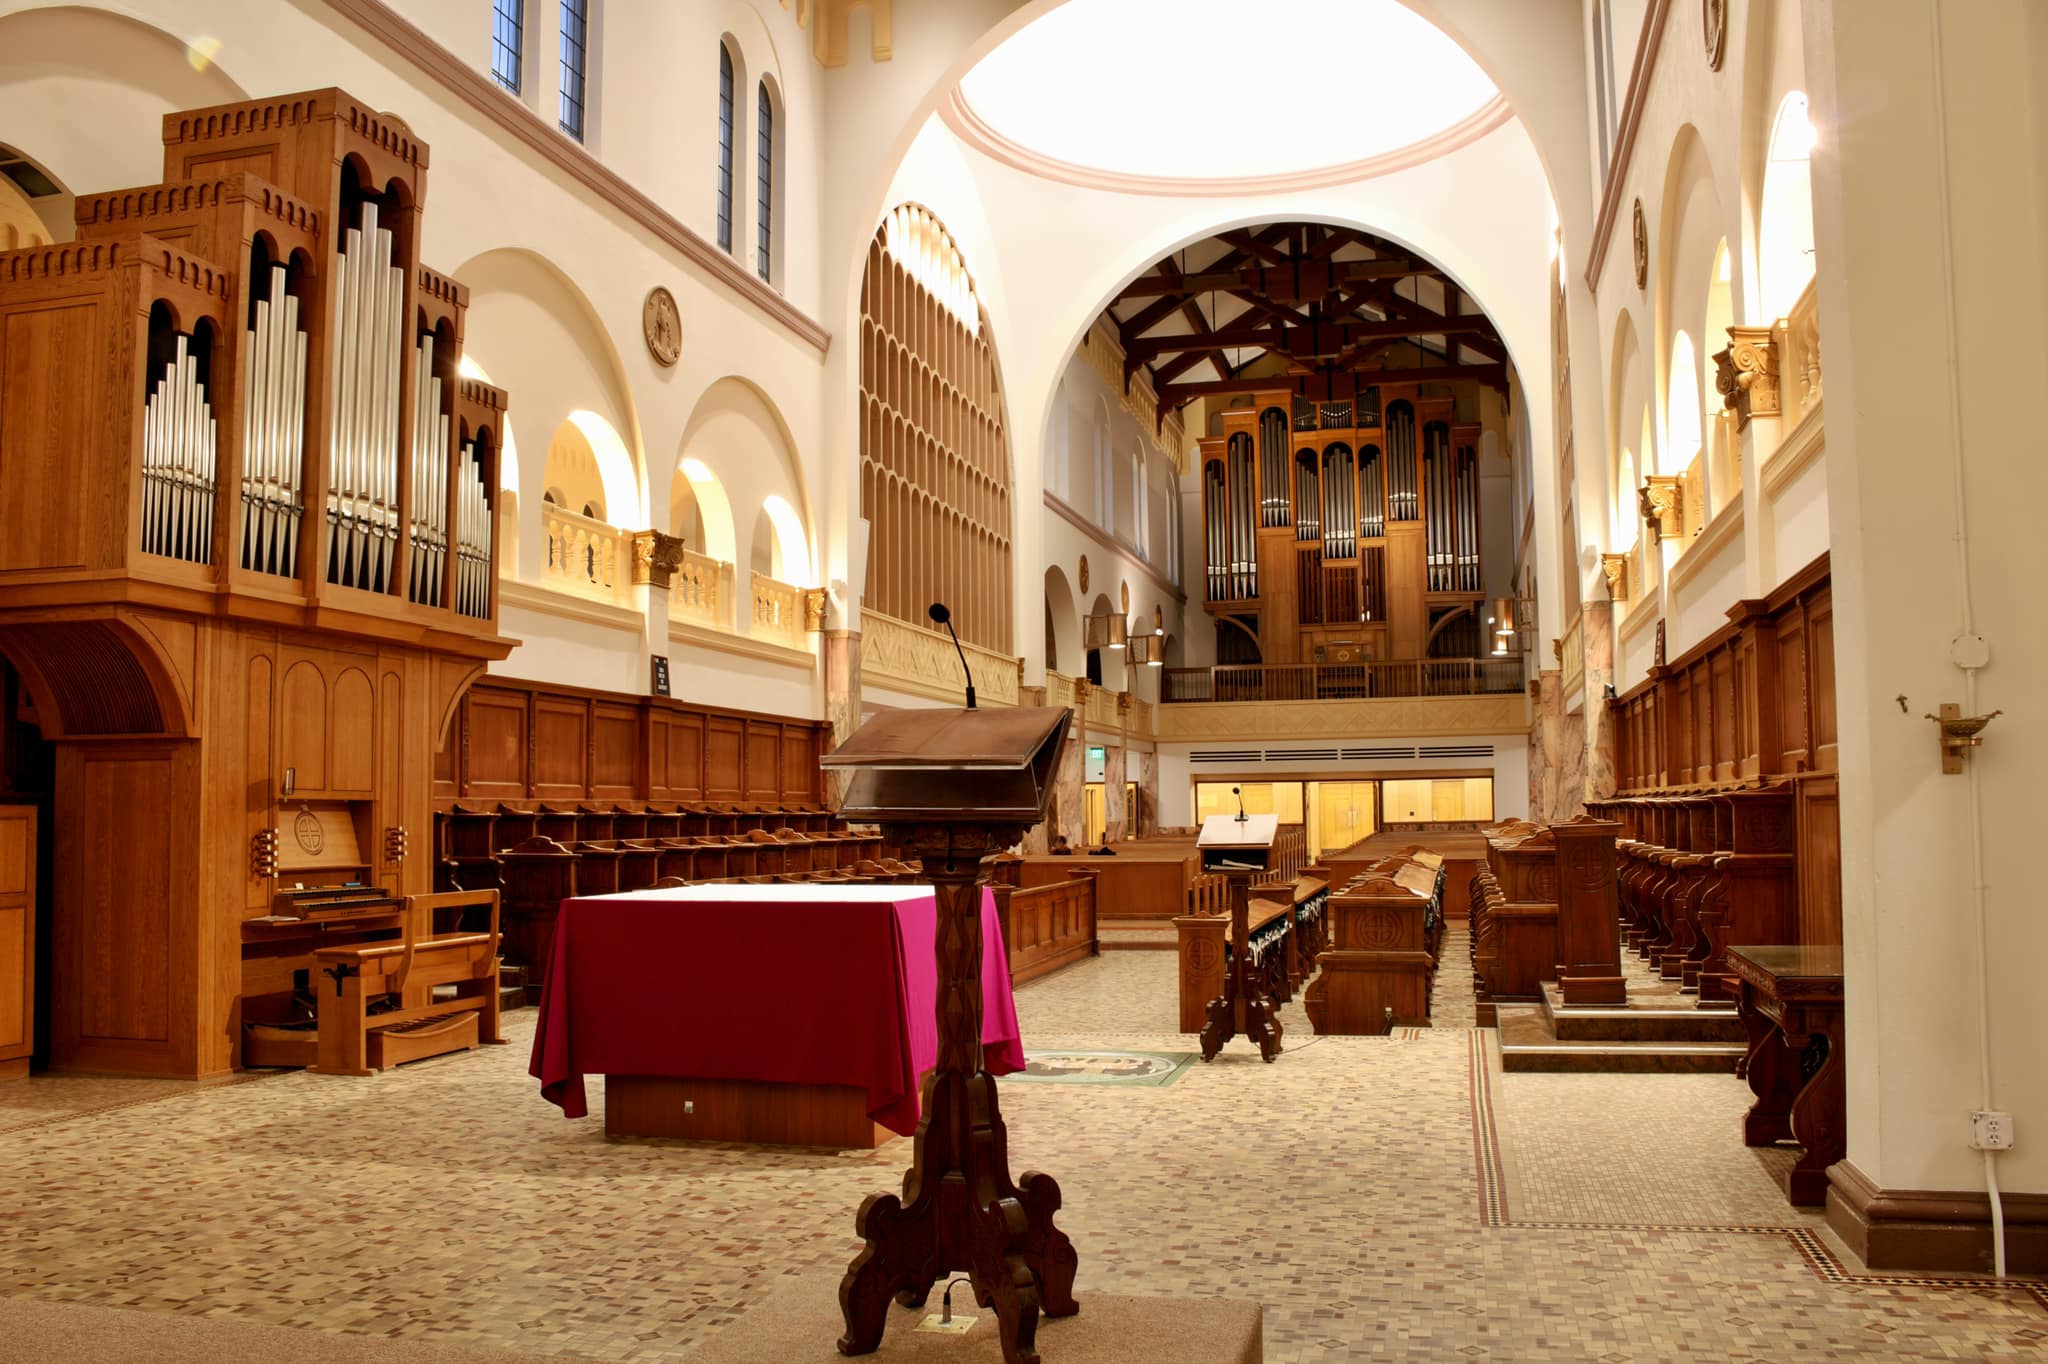 ID84 aligns sound quality of the choir and spoken word at Mount Angel Abbey